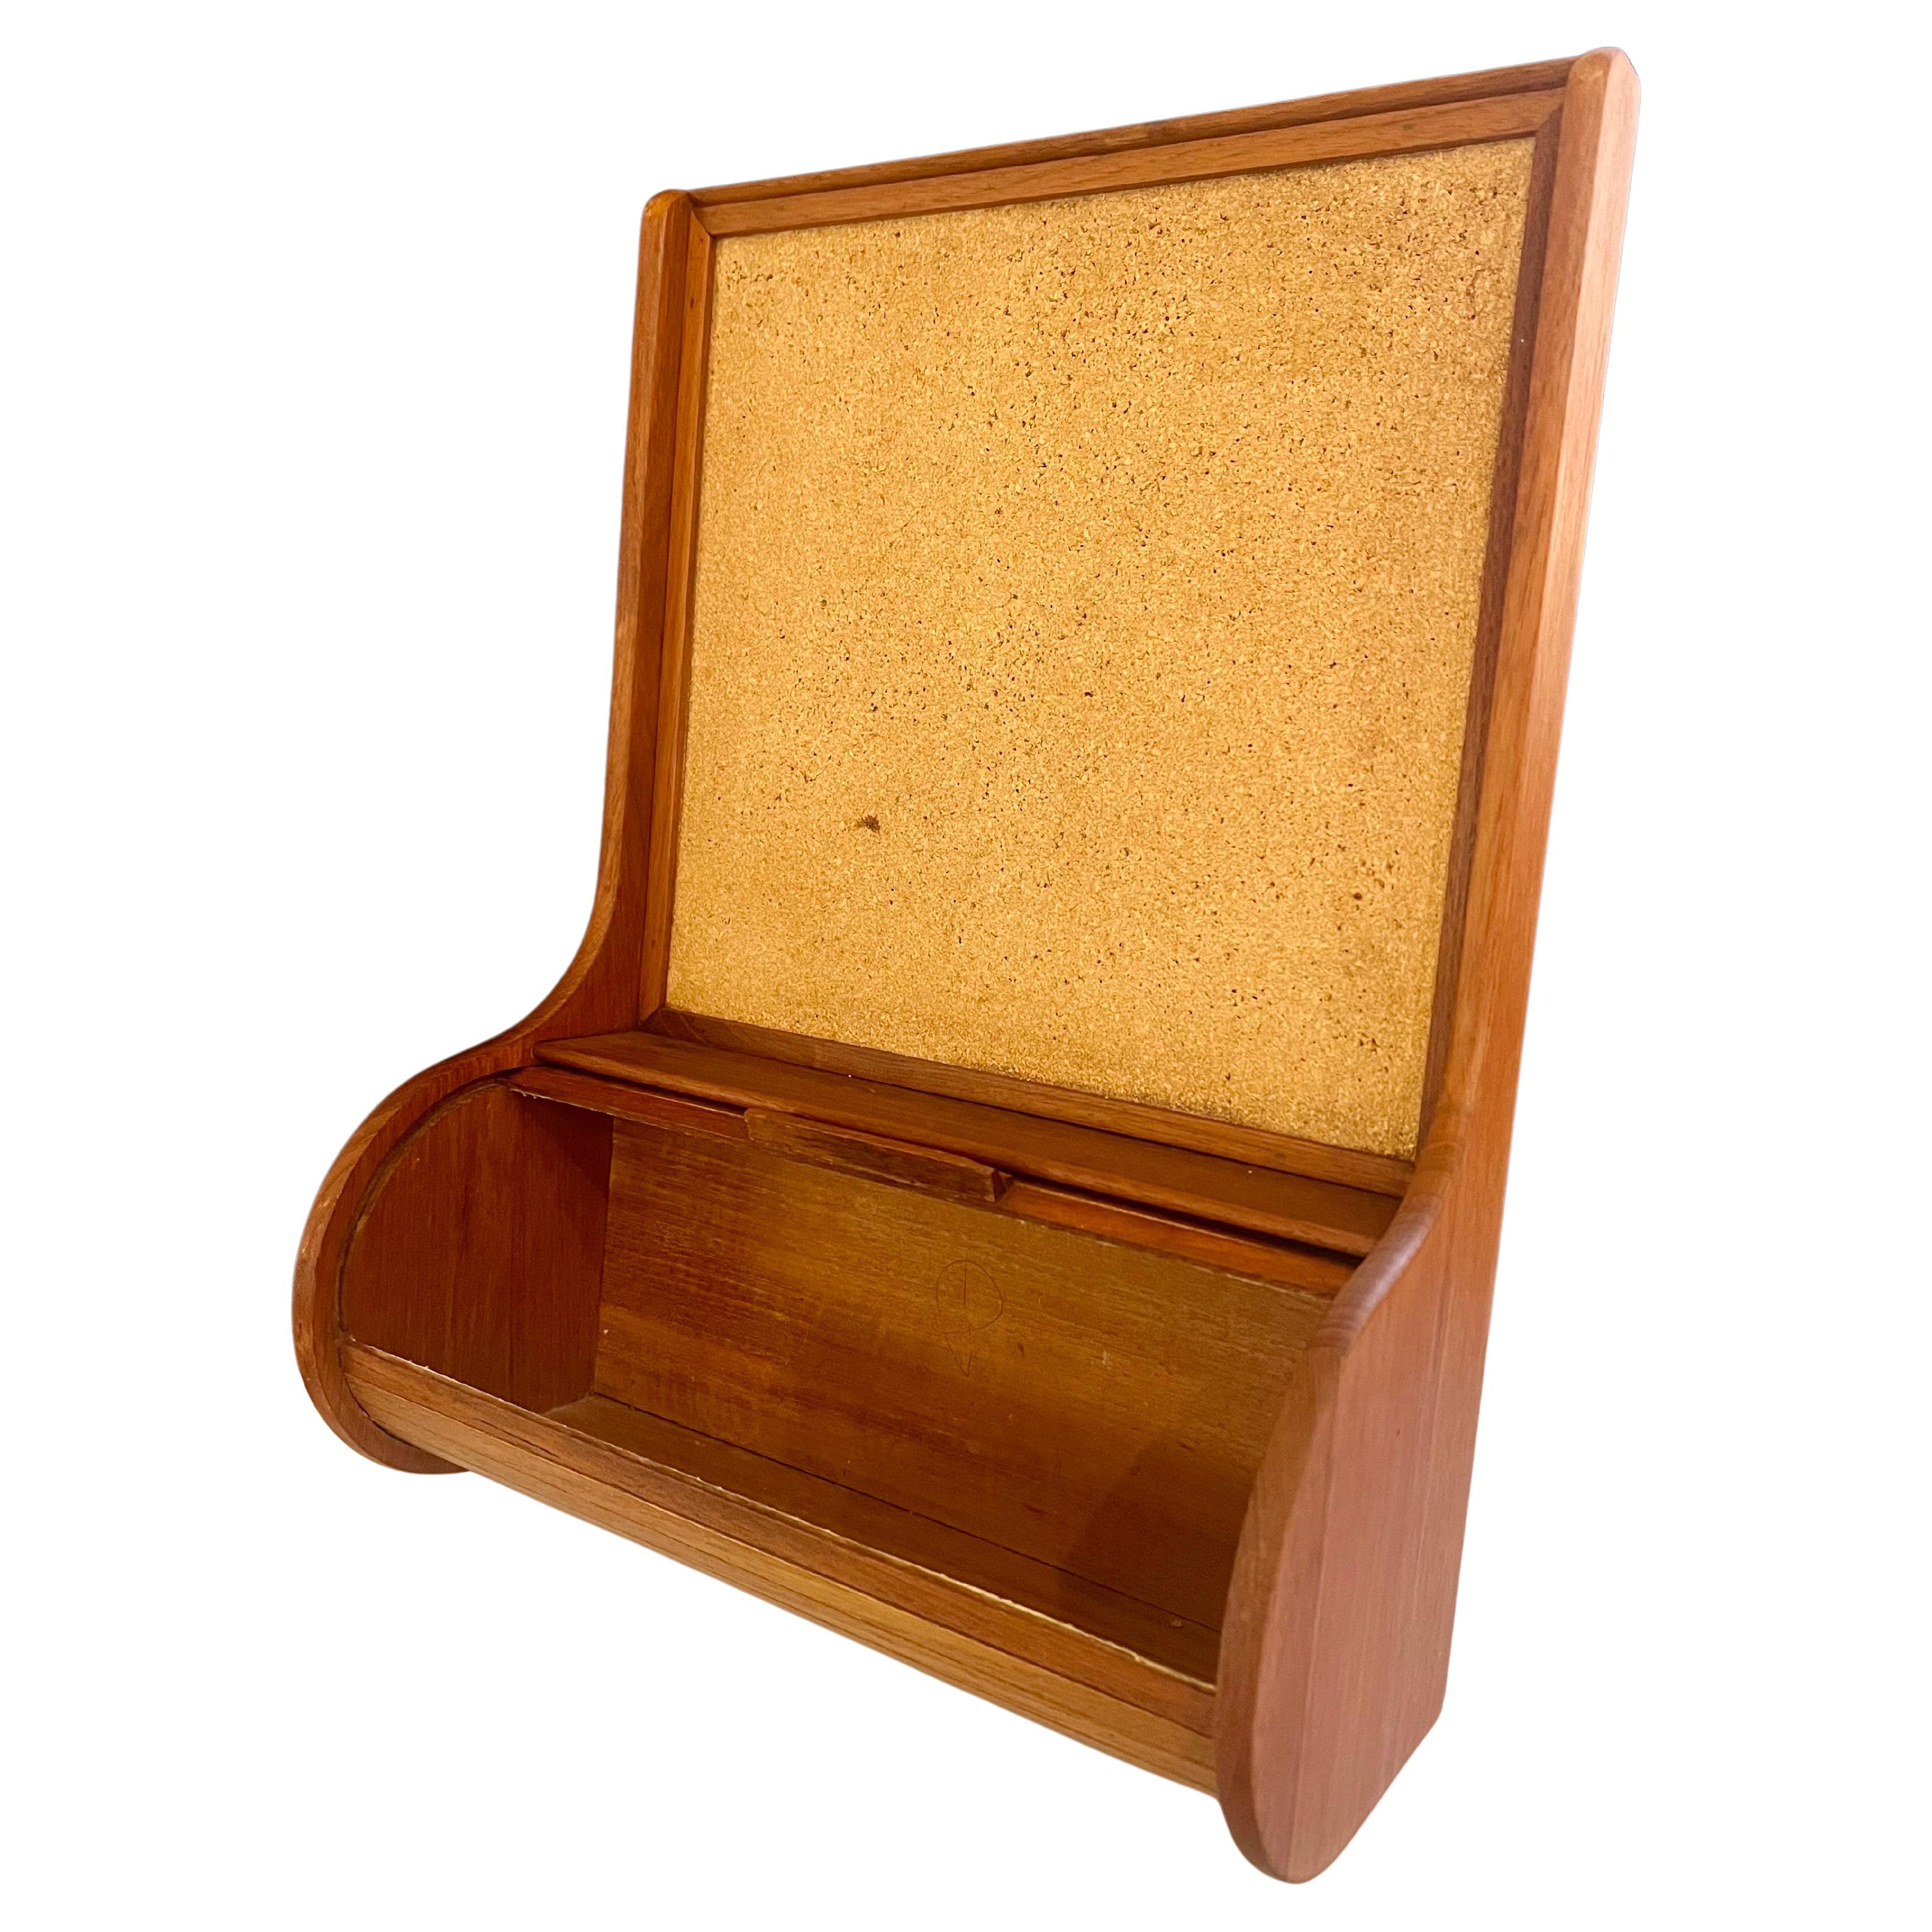 A unique Danish solid teak wall hanging roll top trinket box, and memo pad with cork circa 1970's, versatile rare, and unique perfect for mid century, danish modern home decor.